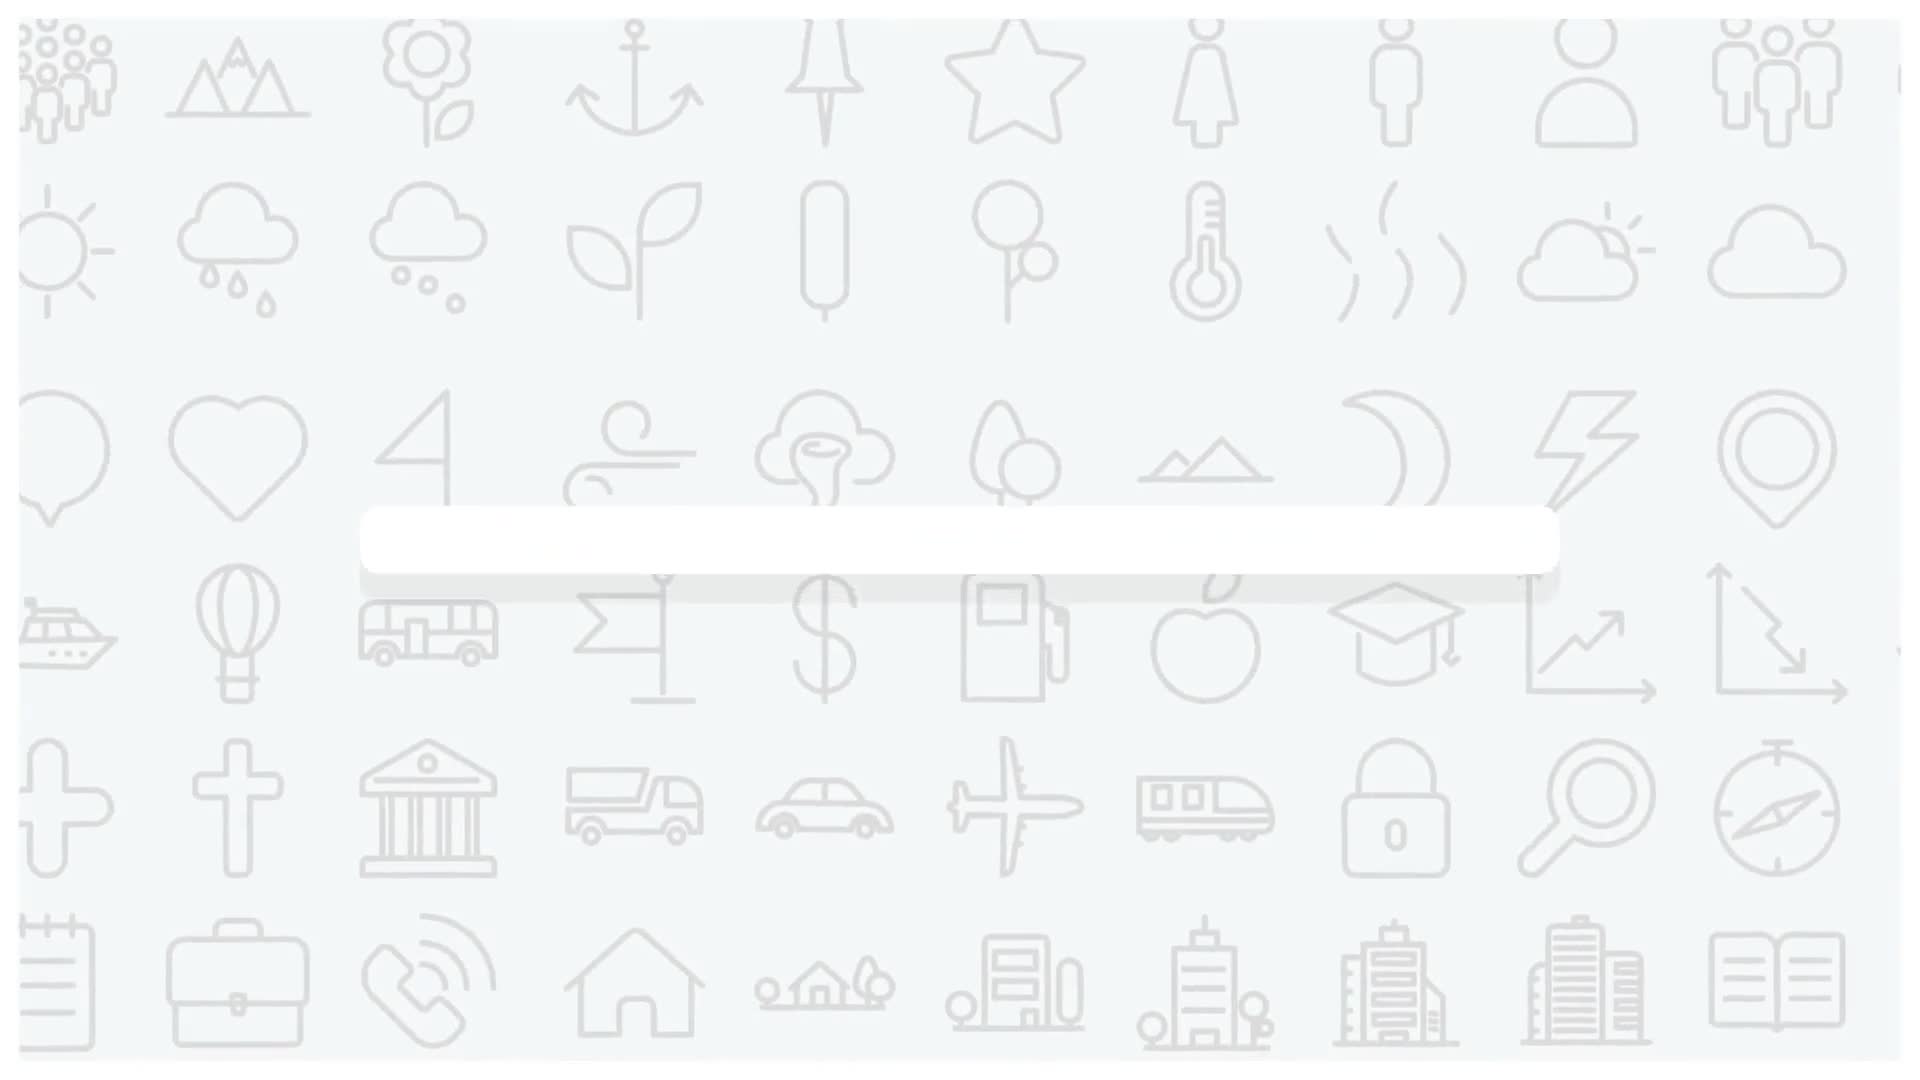 Map Linear Icon Pack - Download Videohive 23428612